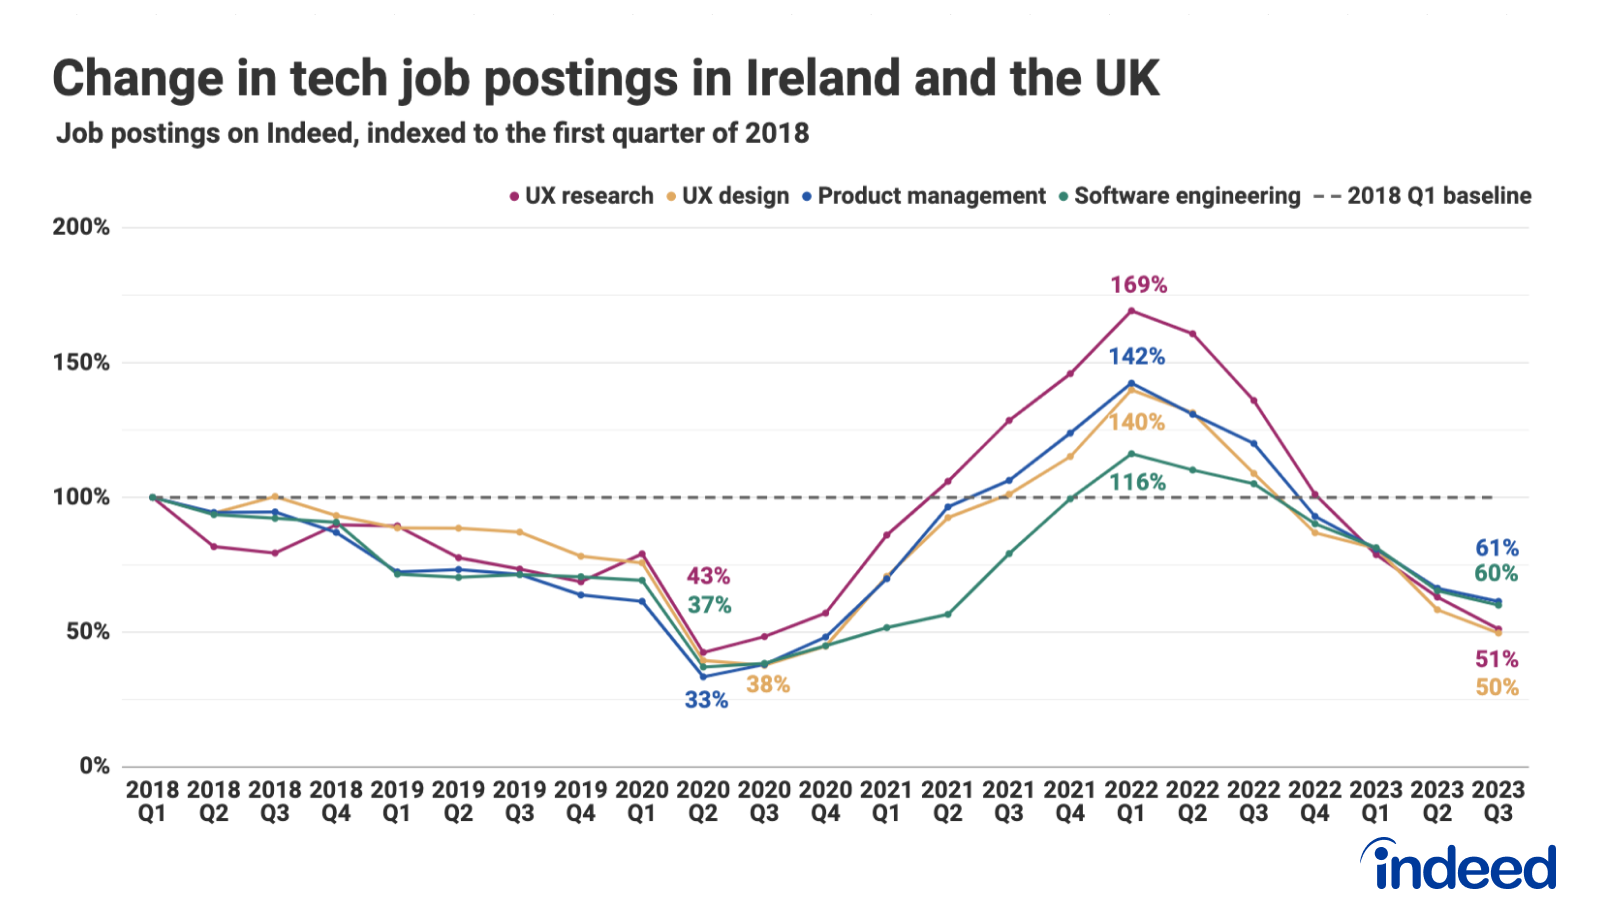 A line graph titled "Change in tech job postings in Ireland and the UK" showing job post data for four roles indexed to Q1 2018.